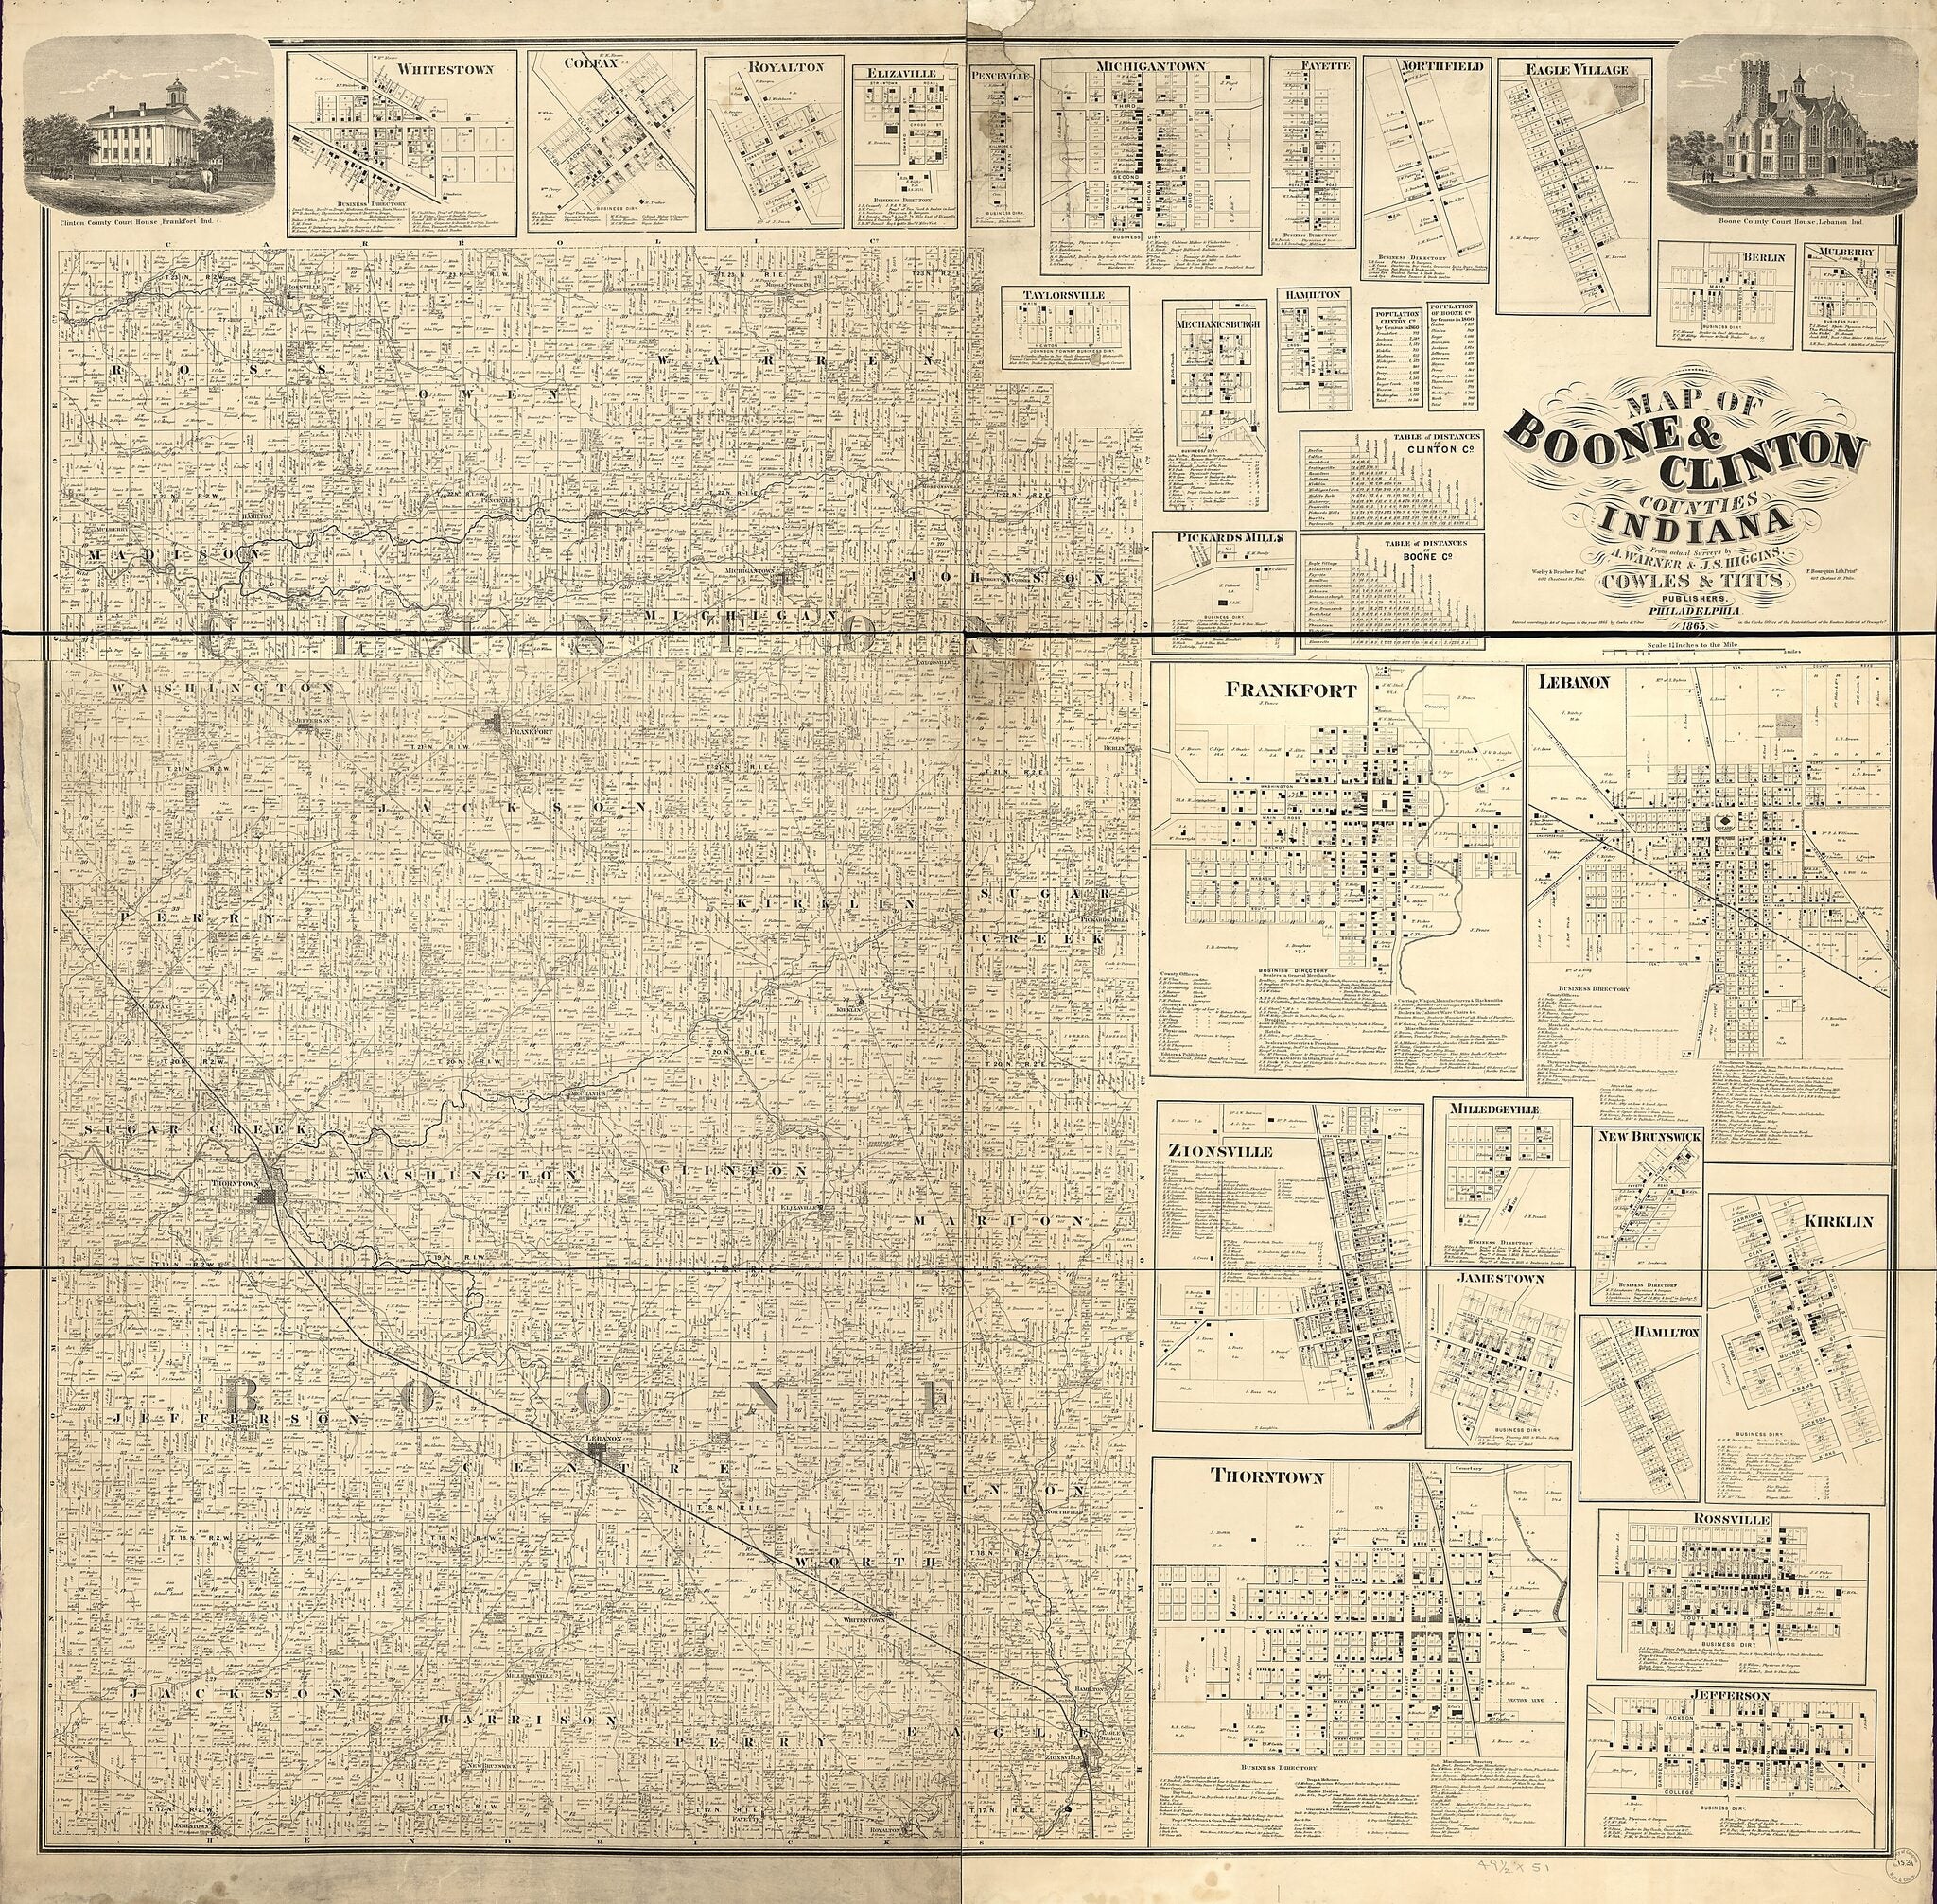 This old map of Map of Boone &amp; Clinton Counties, Indiana from 1865 was created by F. (Frederick) Bourquin, A. Warner,  Worley &amp; Bracher in 1865